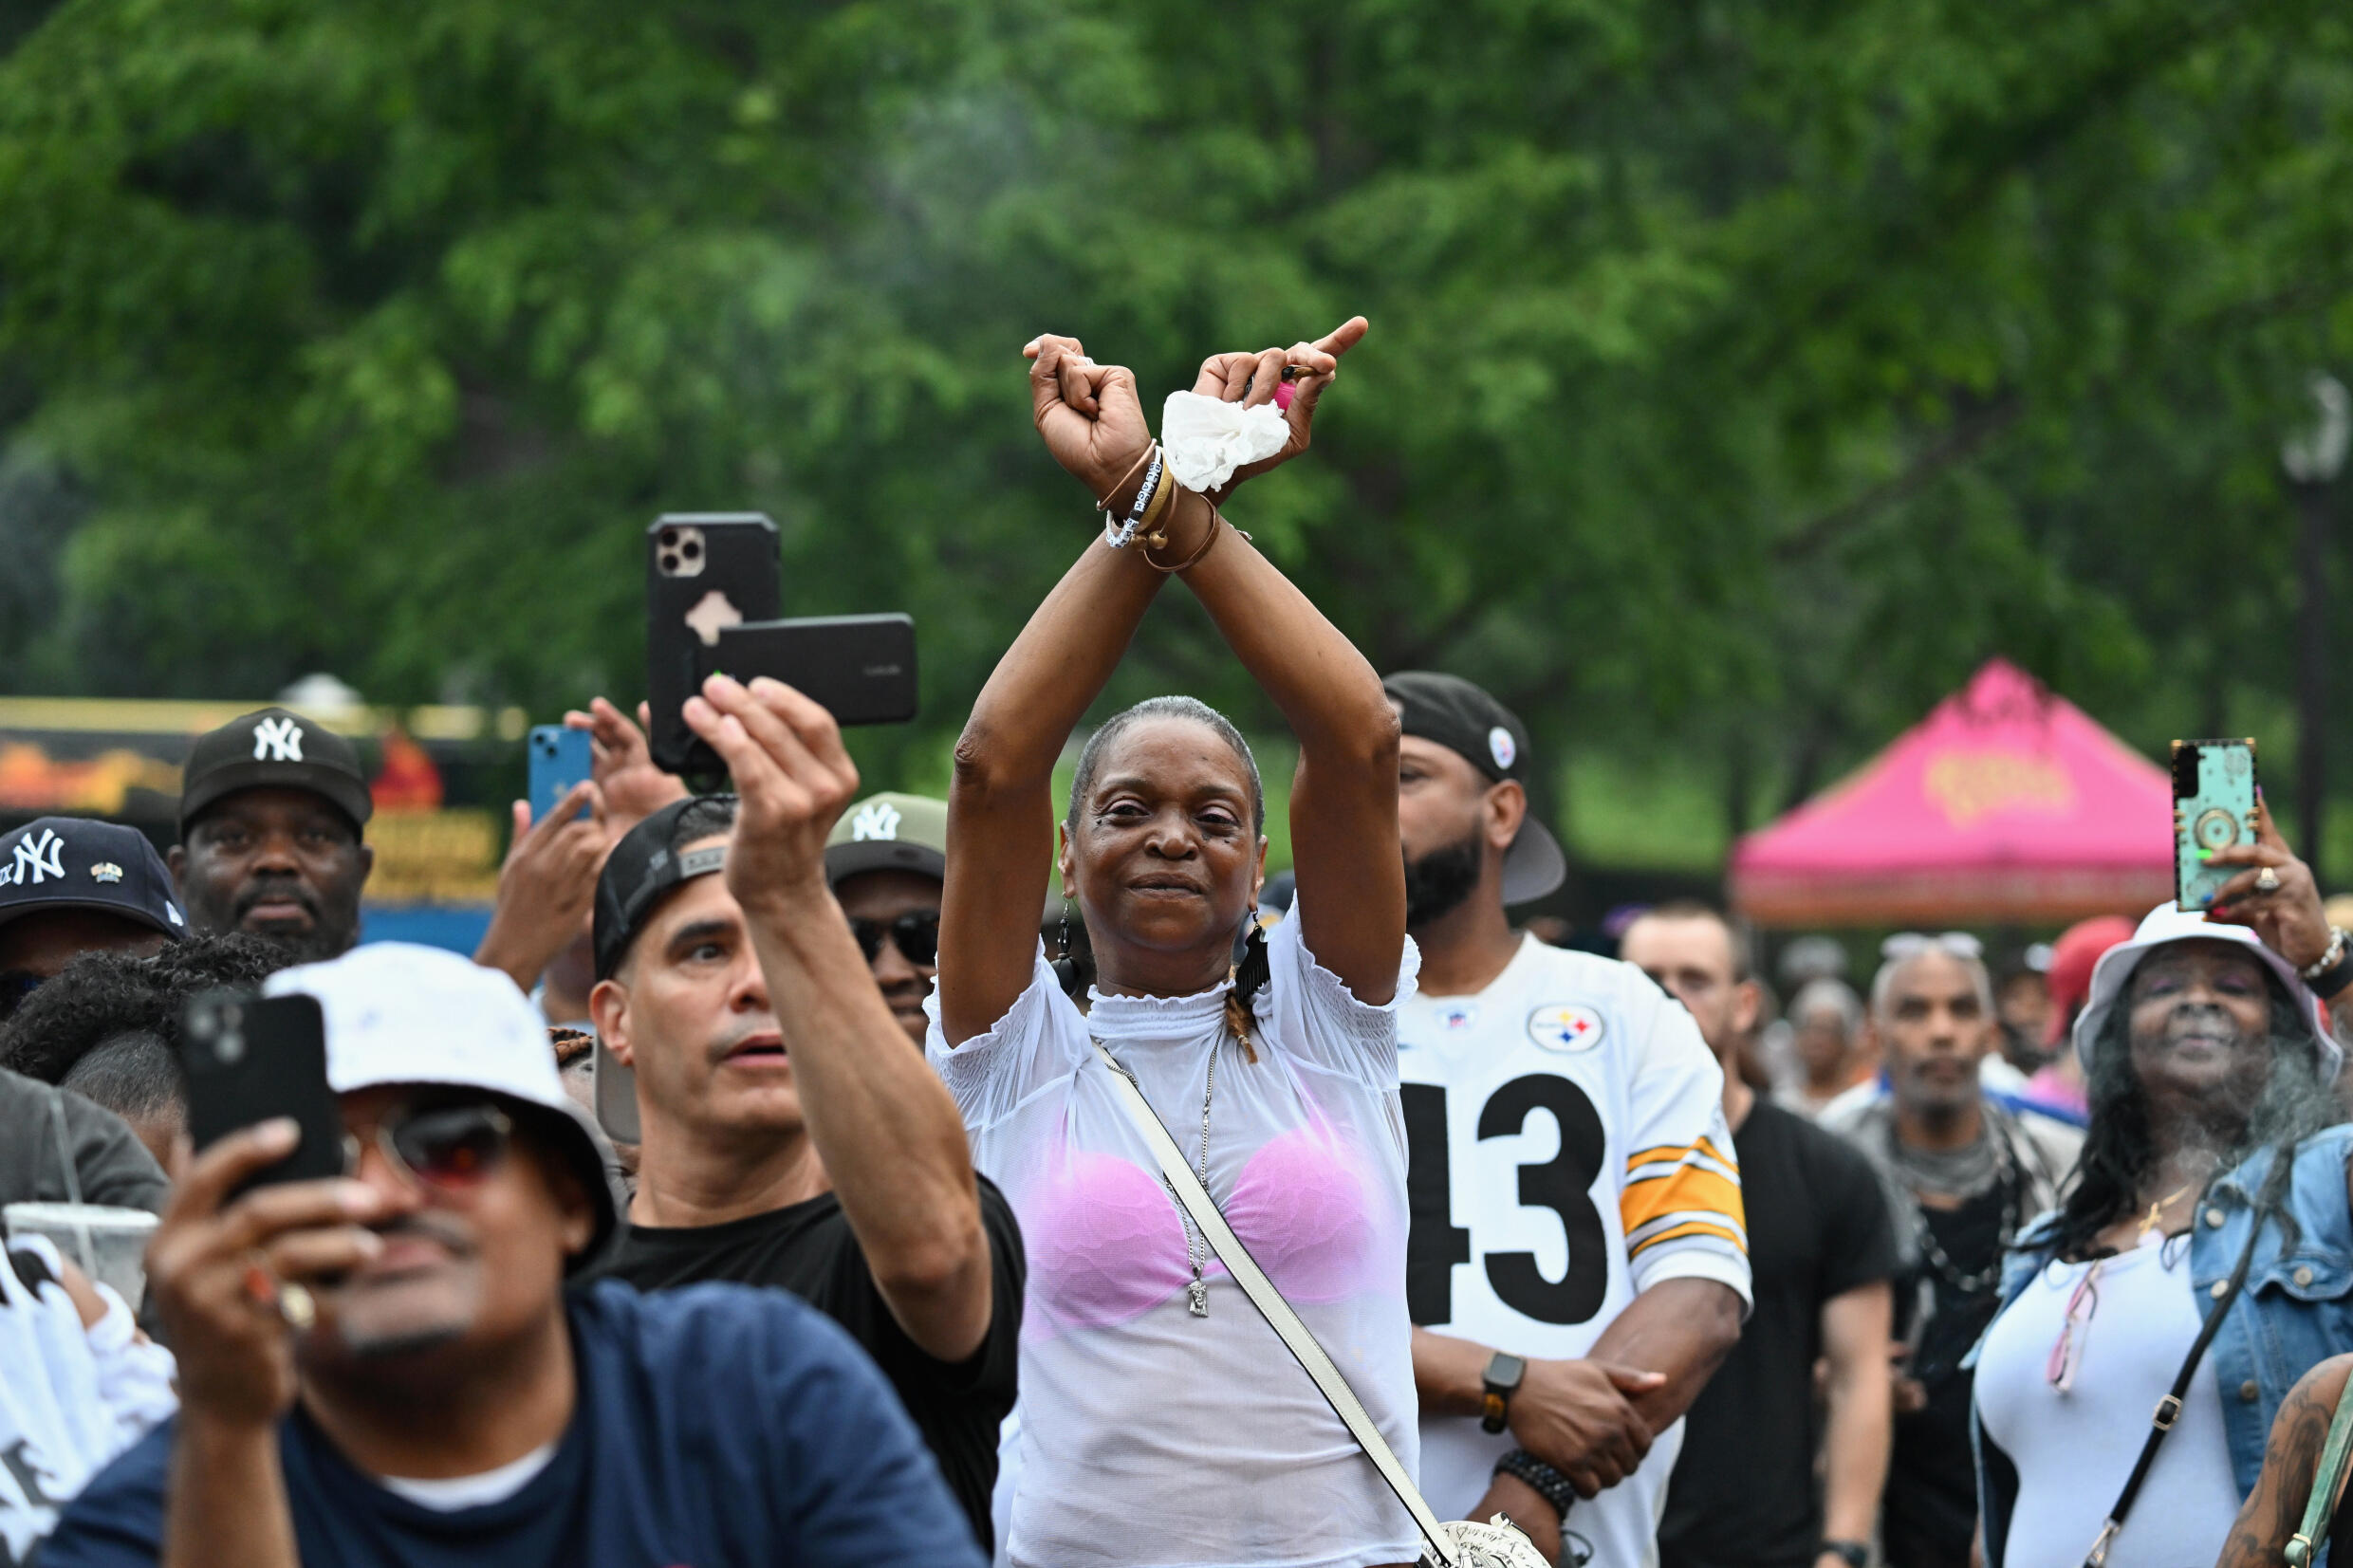 A Bronx audience dances in a throwback to the hip-hop jams of the early 1970s